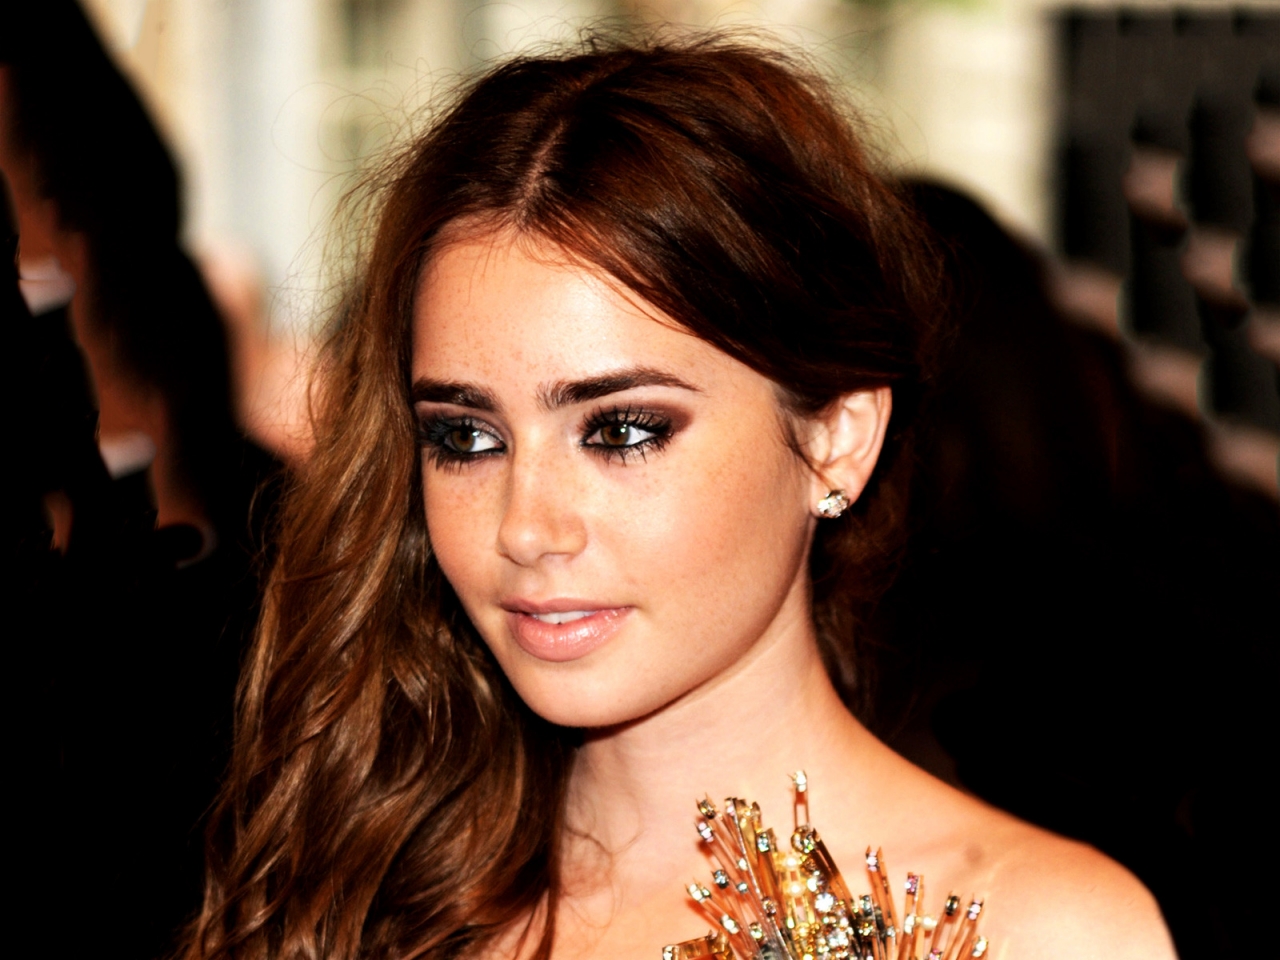 Lily Jane Collins for 1280 x 960 resolution